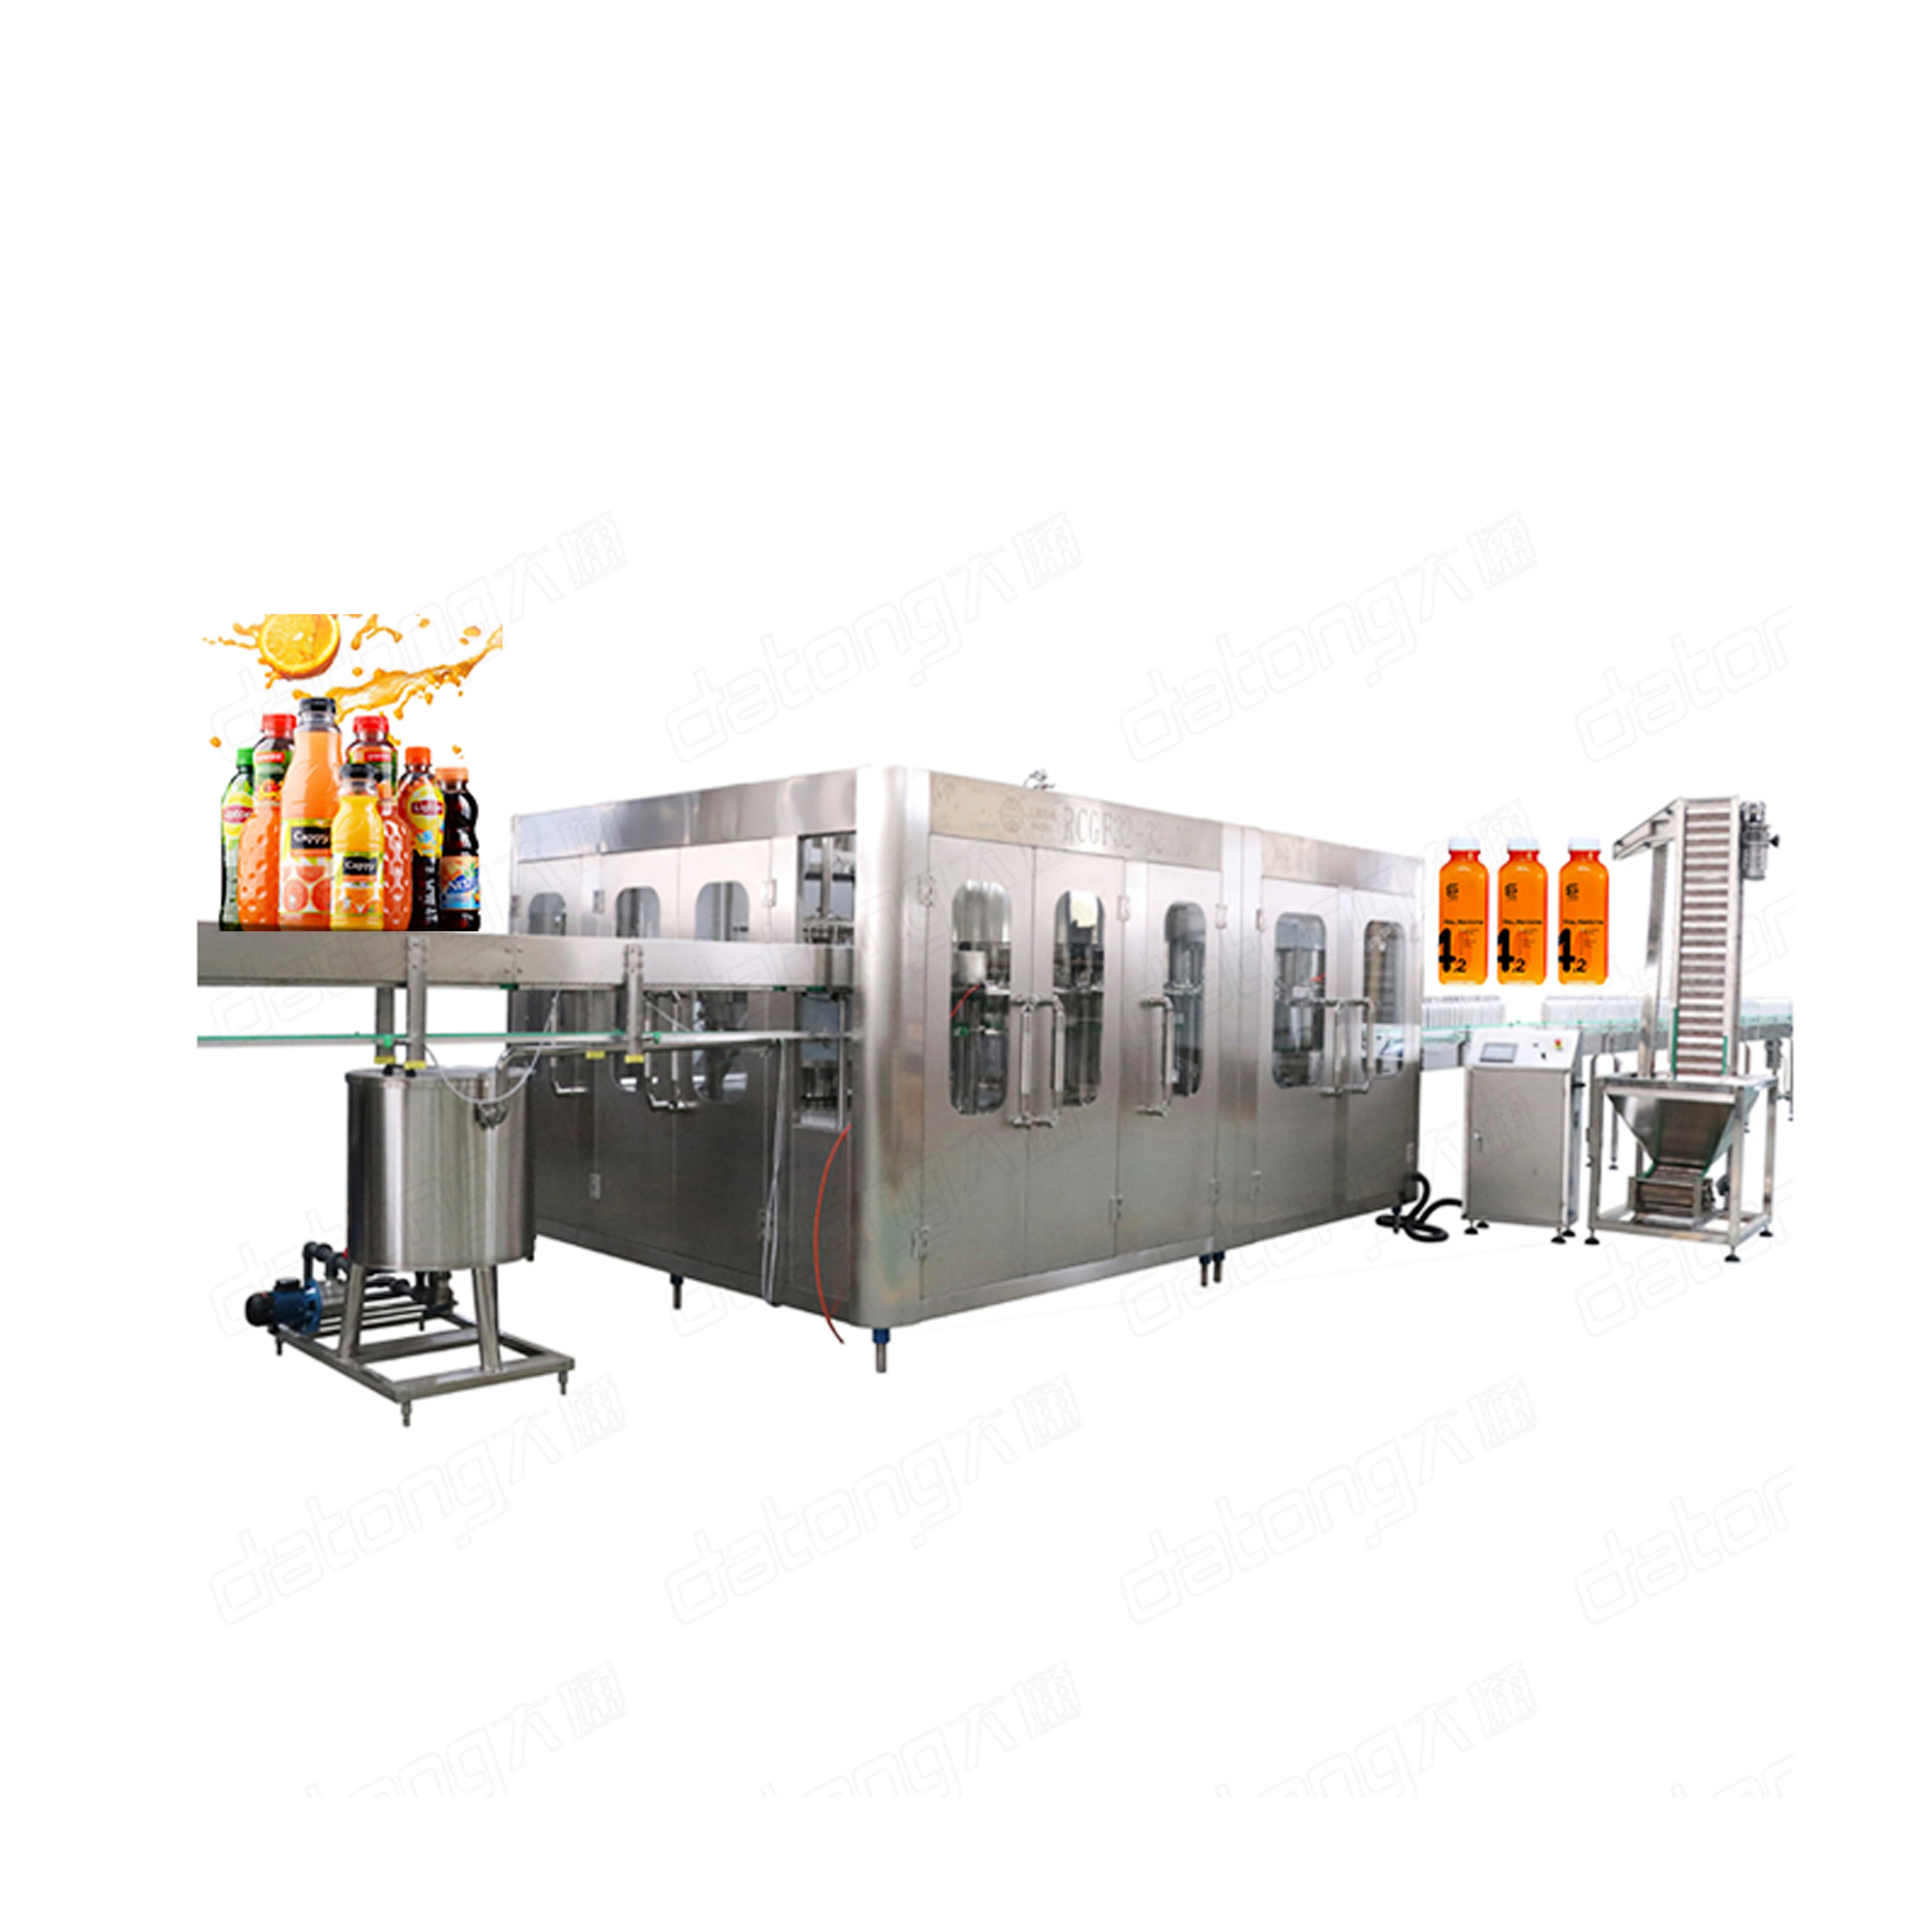 2020 new design small scale fruit juice processing equipment